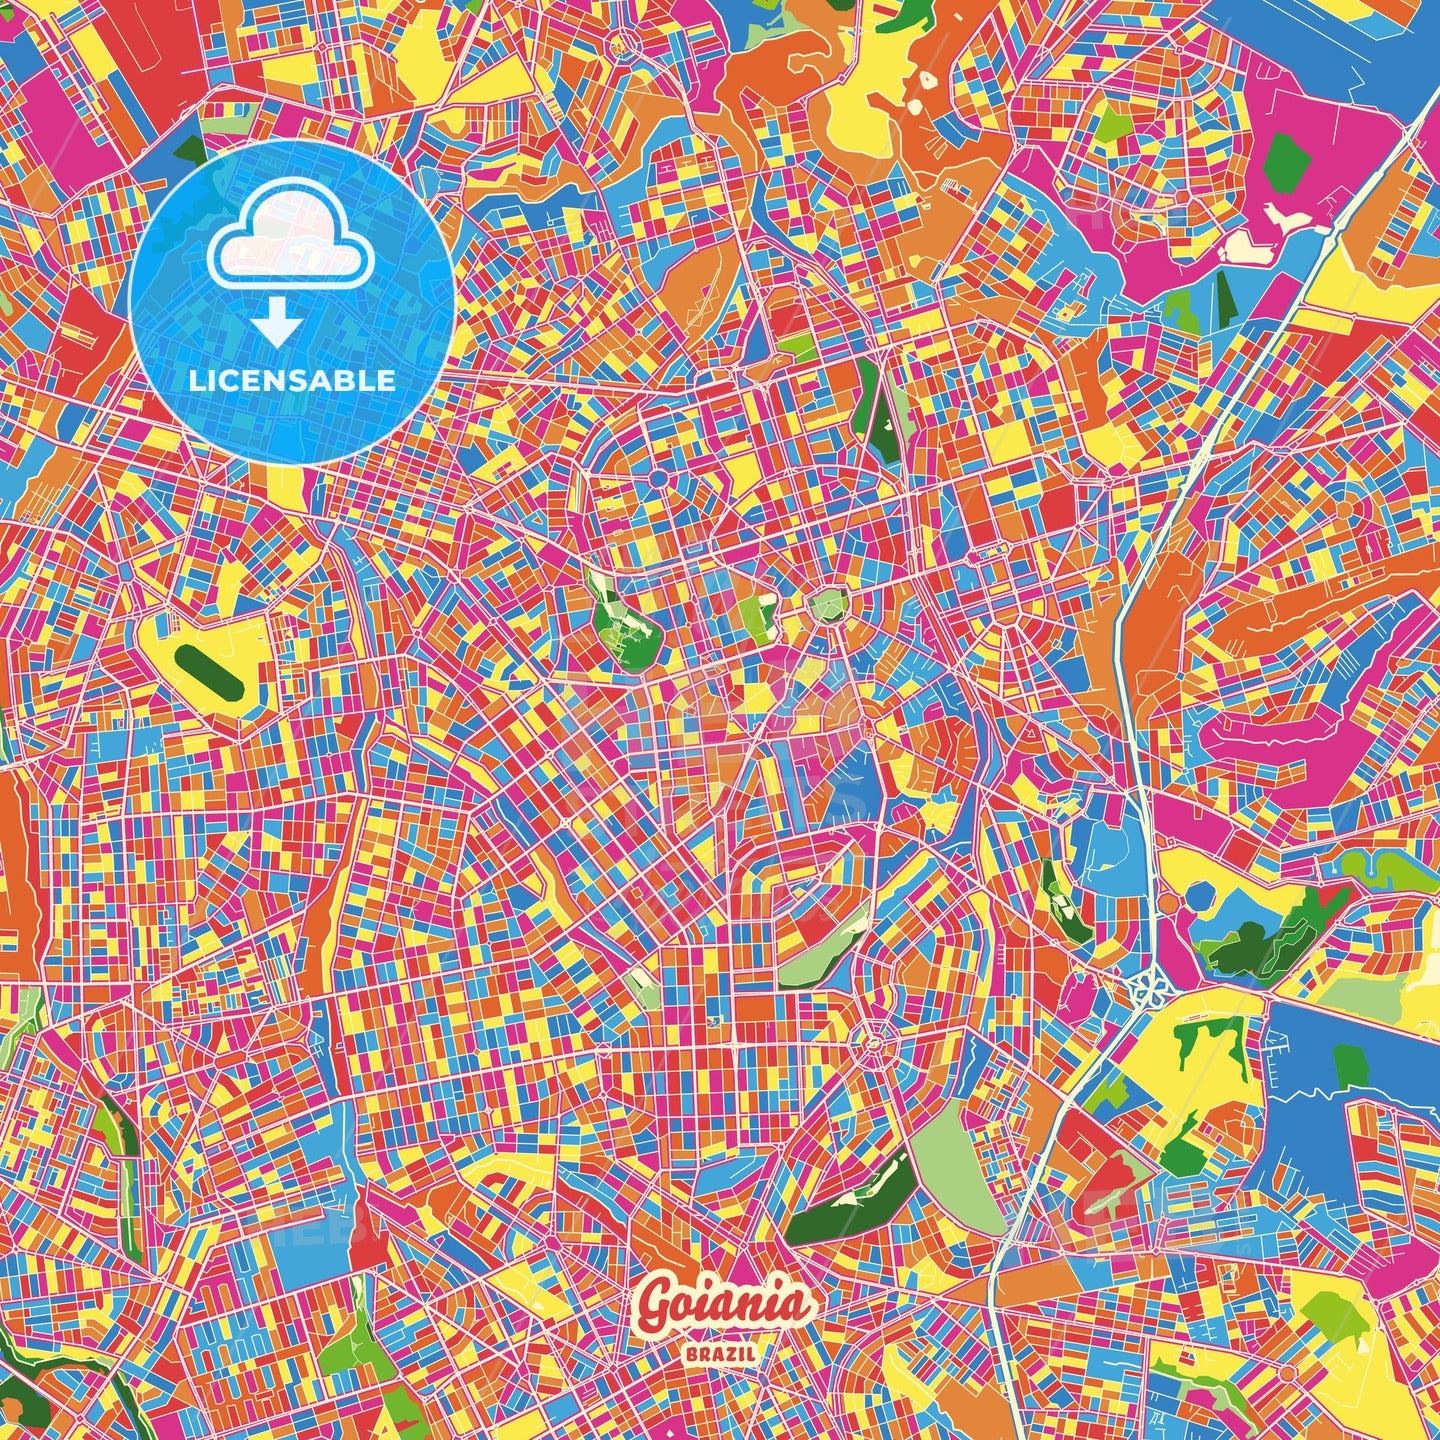 Goiania, Brazil Crazy Colorful Street Map Poster Template - HEBSTREITS Sketches